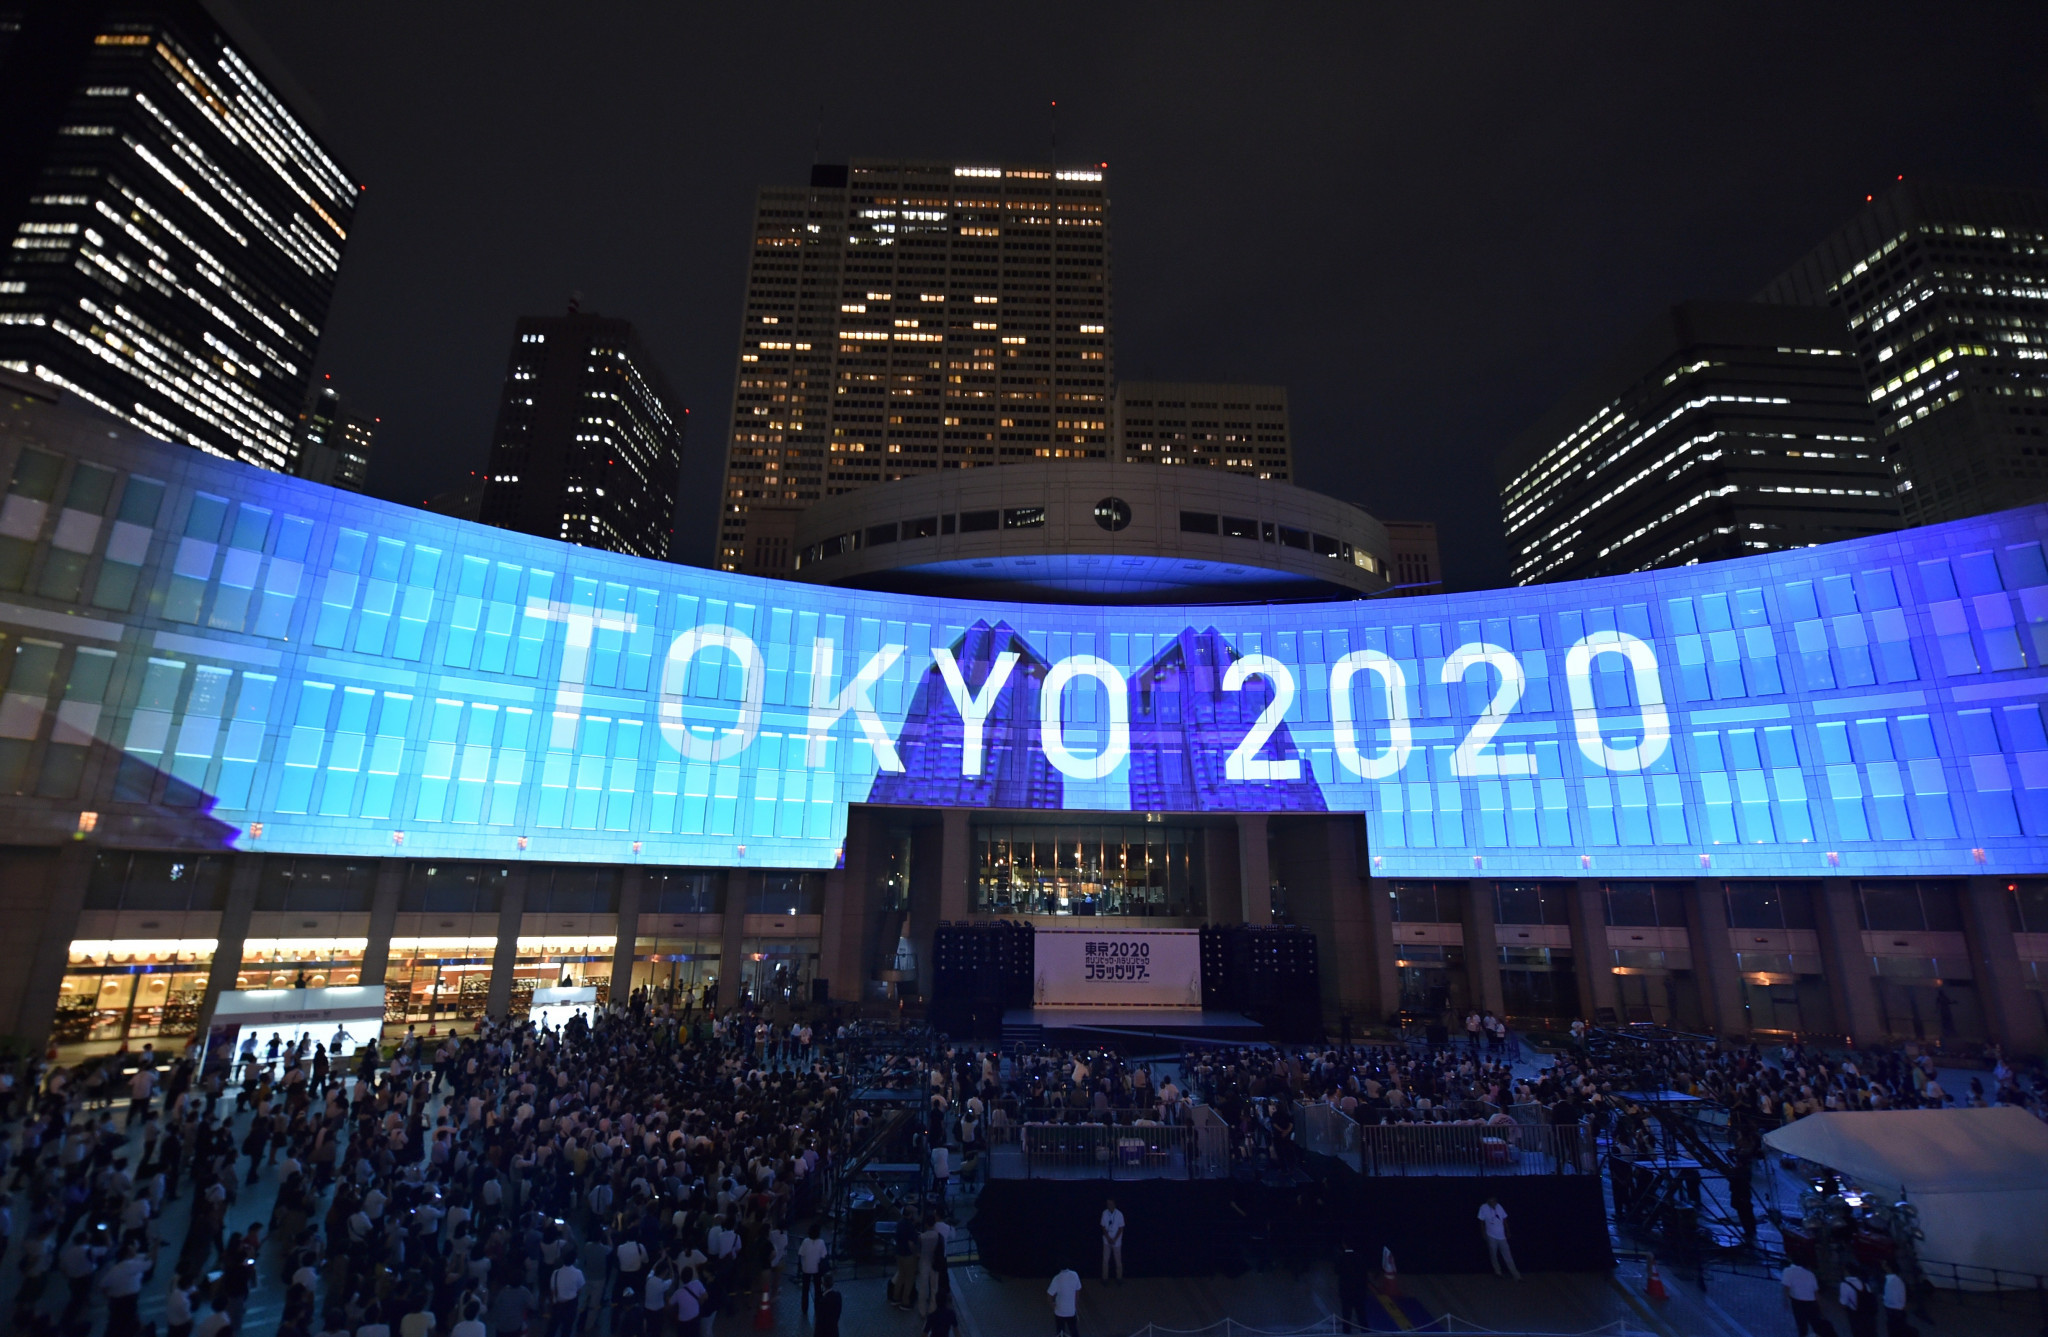 I remain as confident as ever that the 2018 Pyeongchang Games and 2020 Tokyo Games can raise in excess of $10 billion ©Getty Images